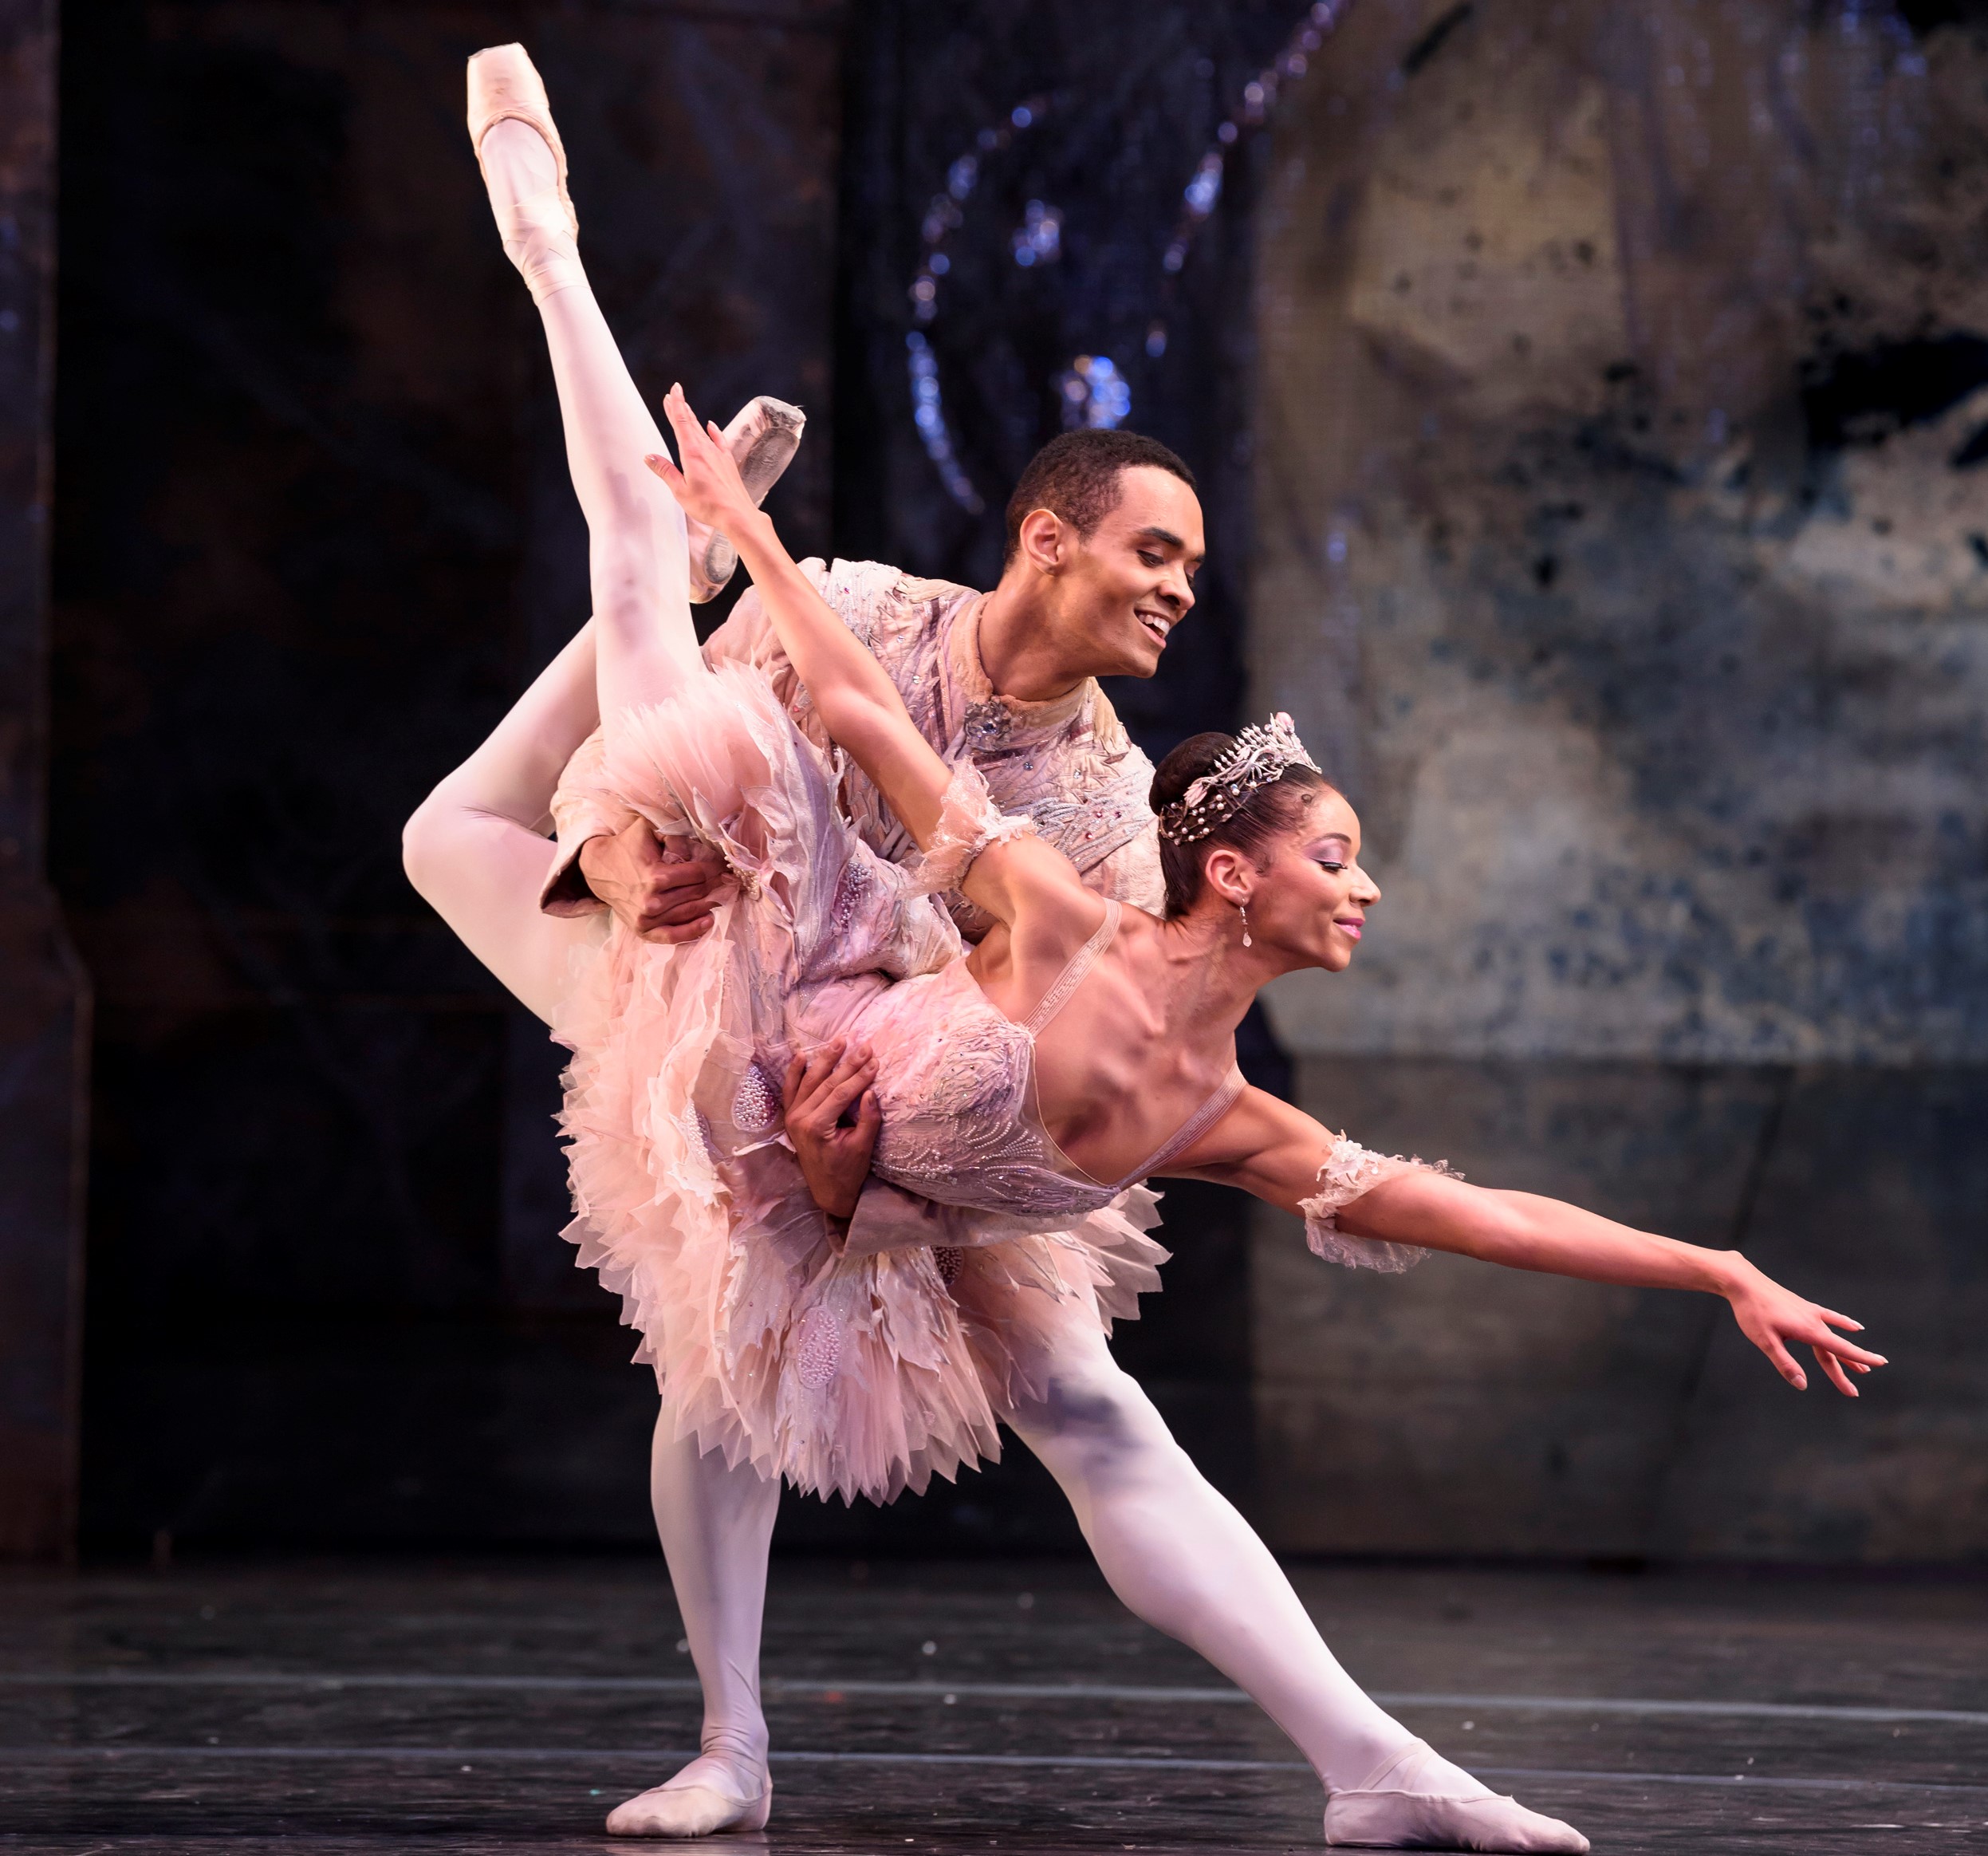 Céline Gittens as the Sugar Plum Fairy and Brandon Lawrence as The Prince (c) Bill Cooper